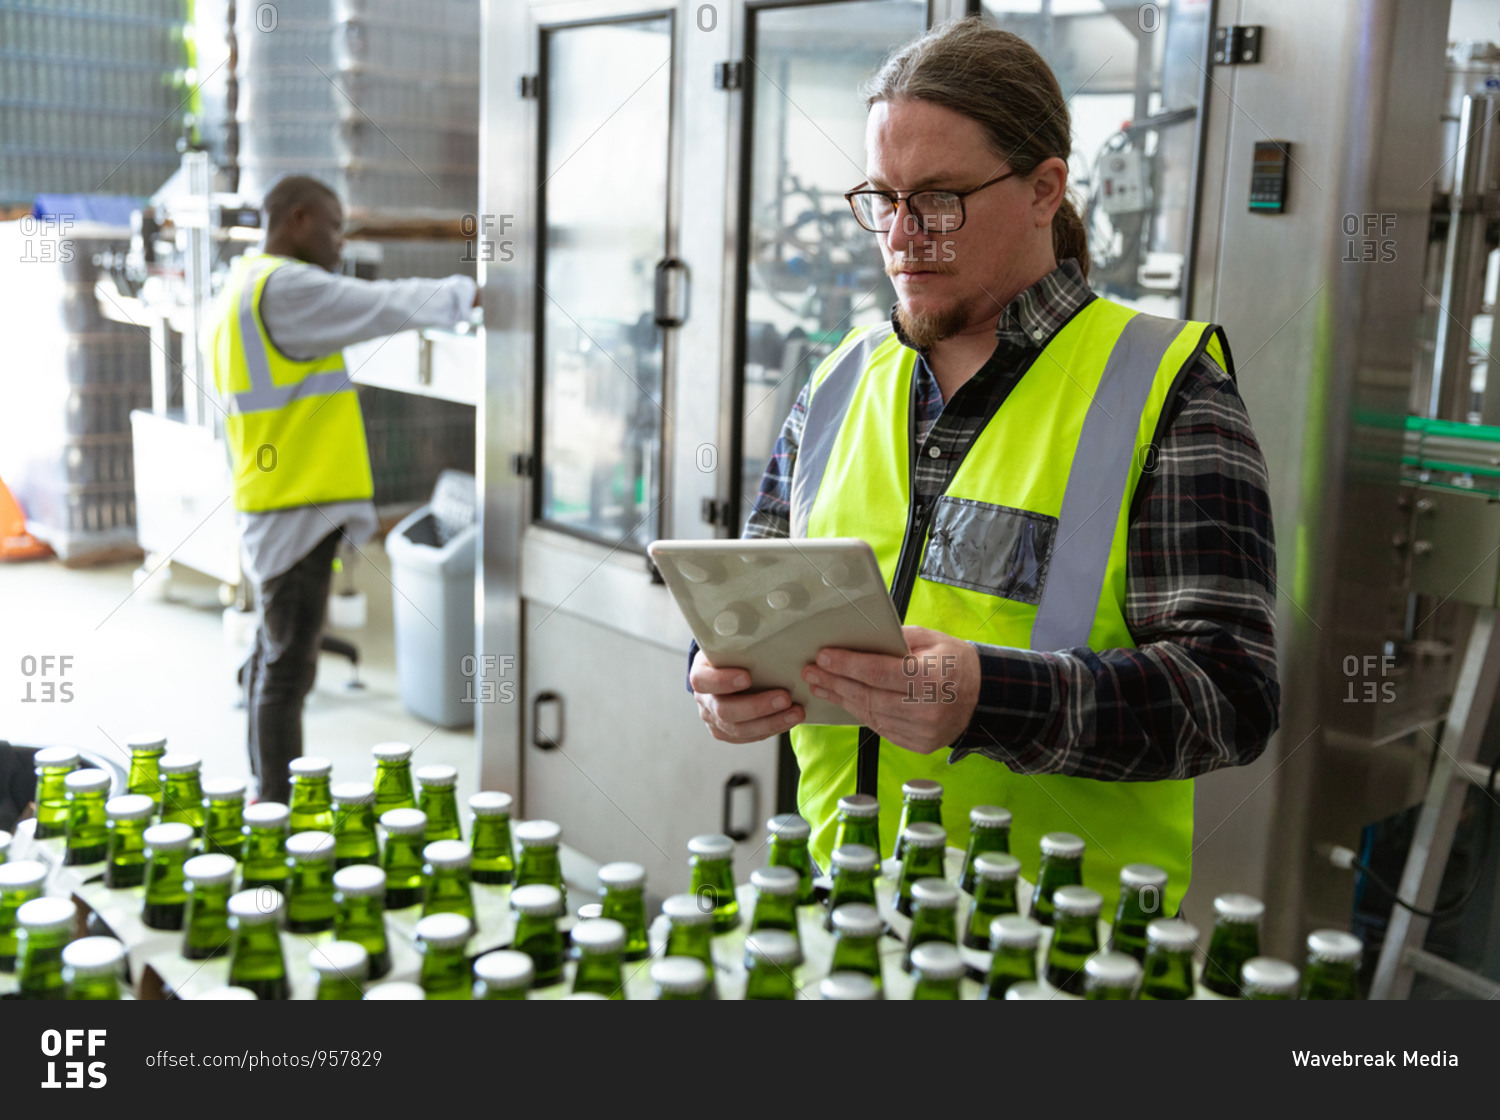 Caucasian man wearing high visibility vest, working in a microbrewery, using a tablet while checking bottles of beer prepared for delivery with an African American man working in the background.